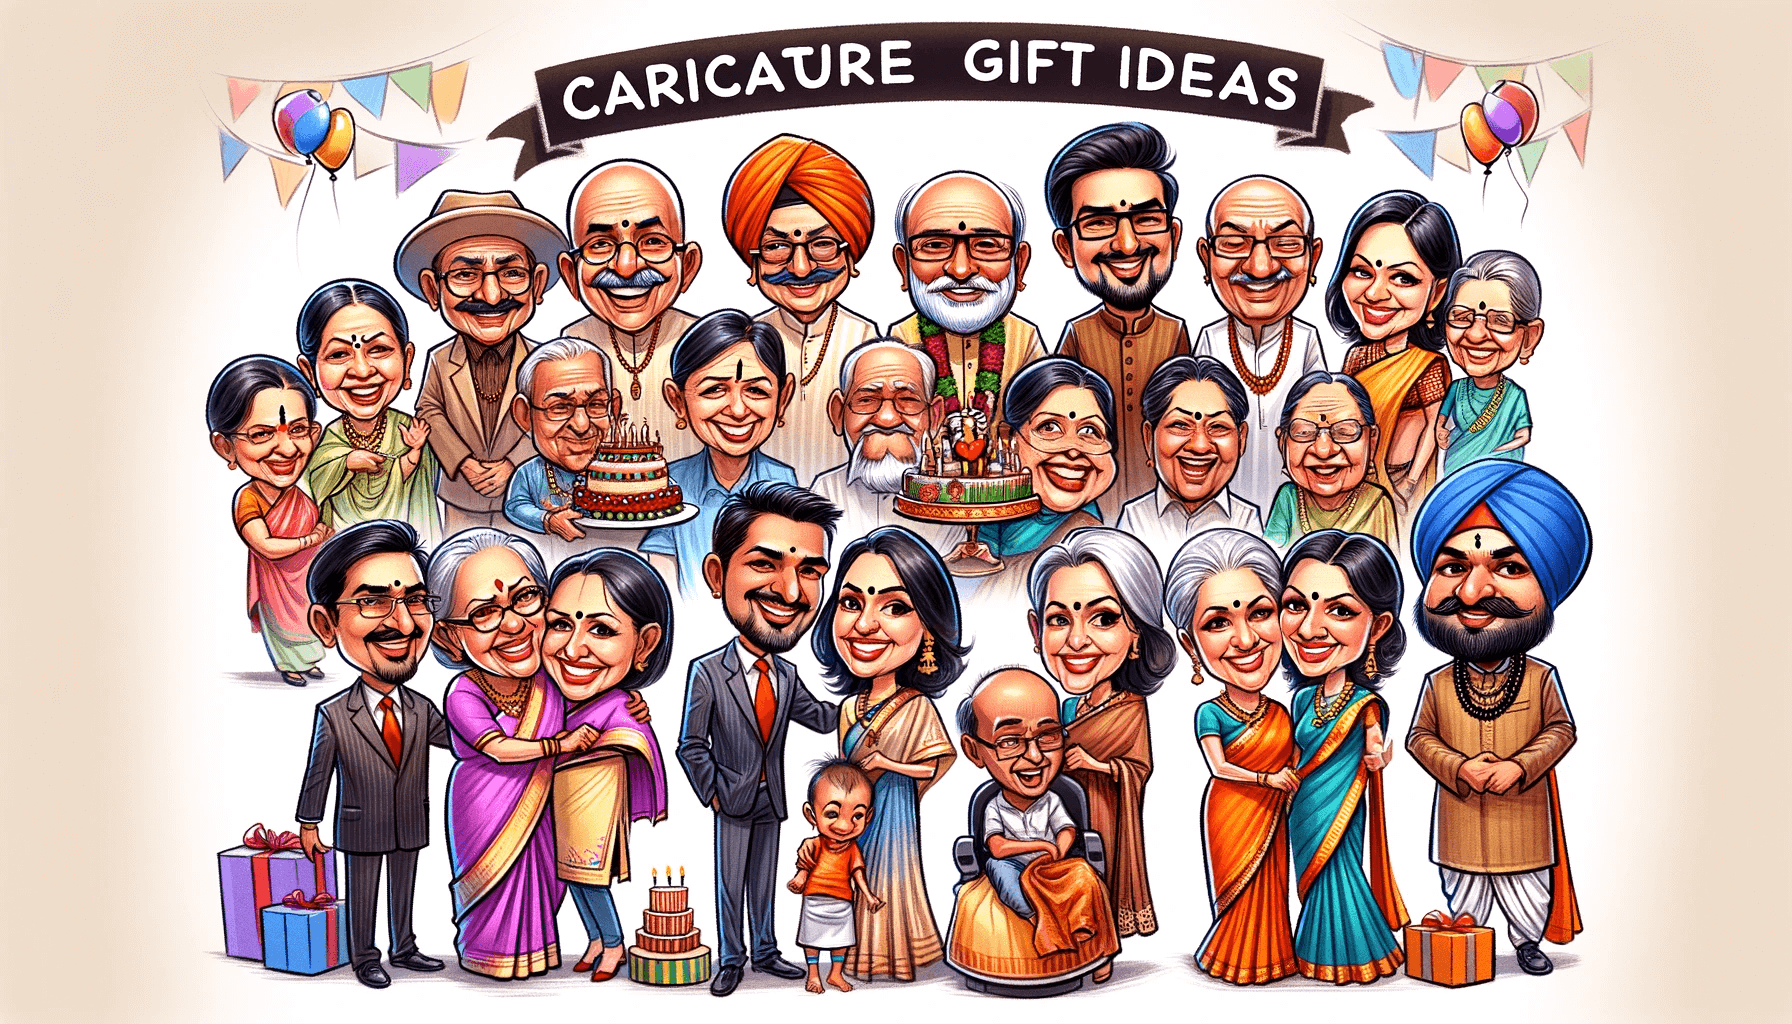 Buy/Send Socha Na Tha Couple Caricature | Best Gifts For Couple